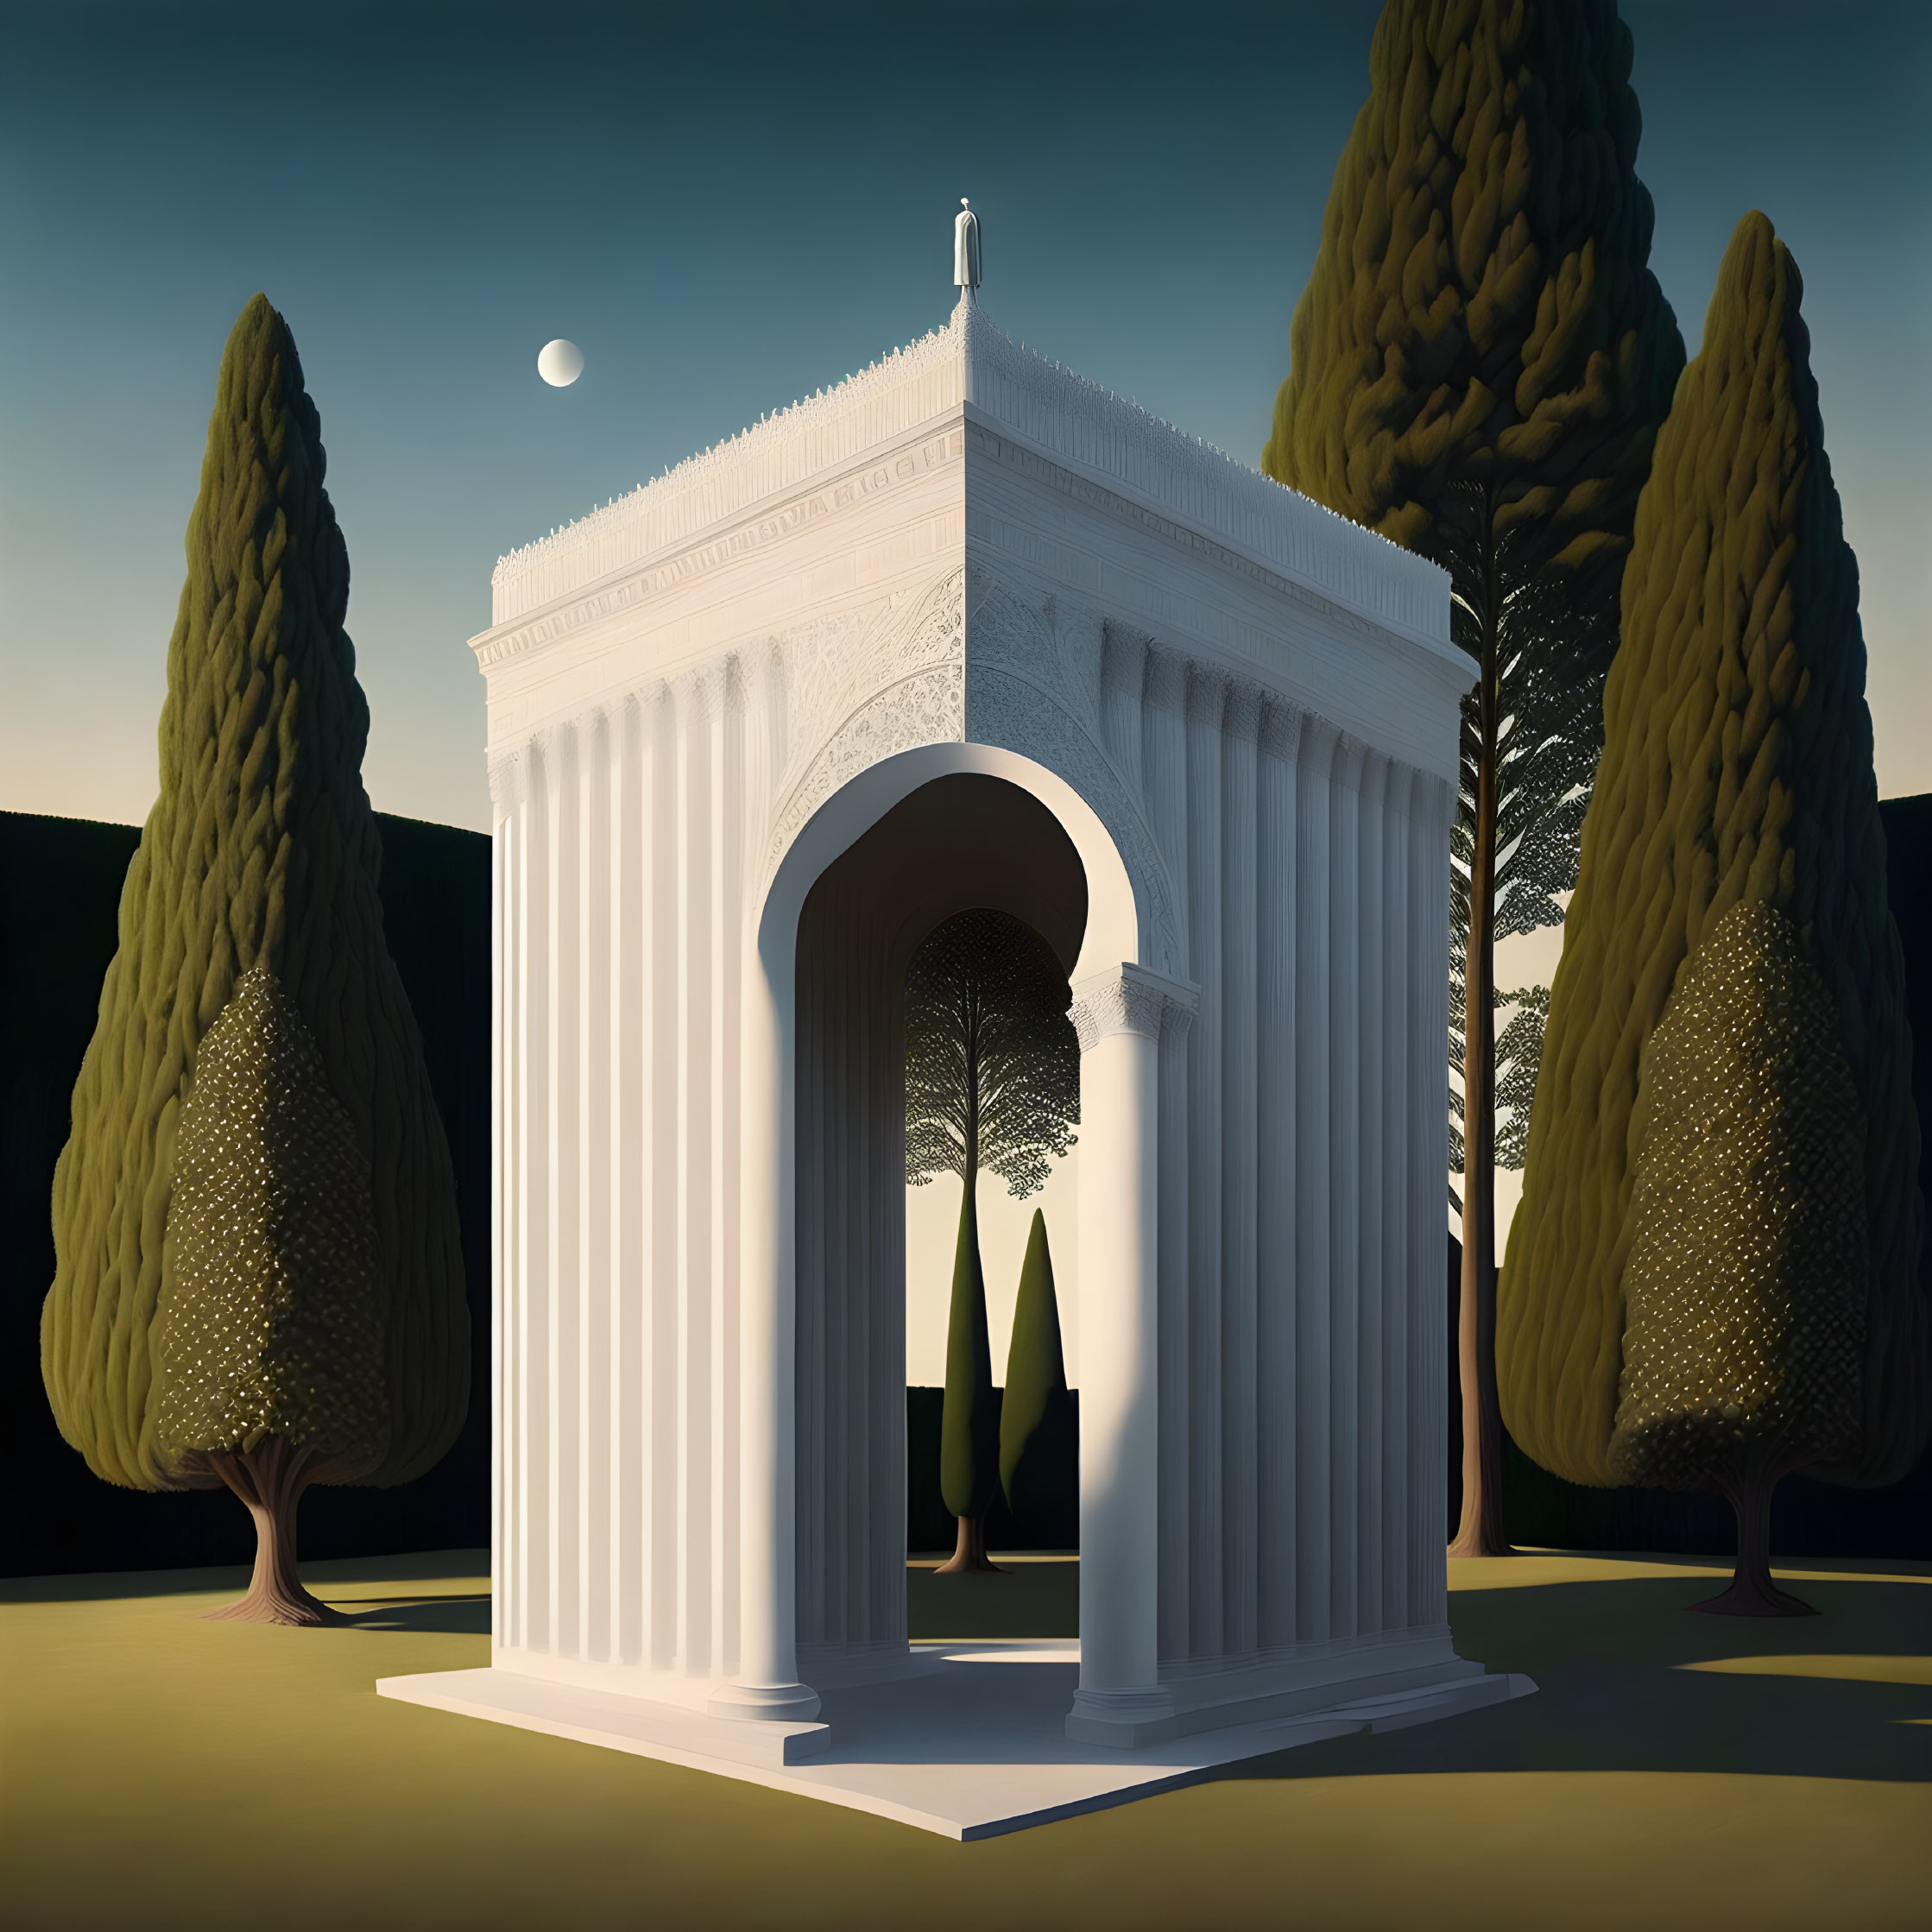 Detailed White Archway and Crescent Moon in Serene Evening Scene